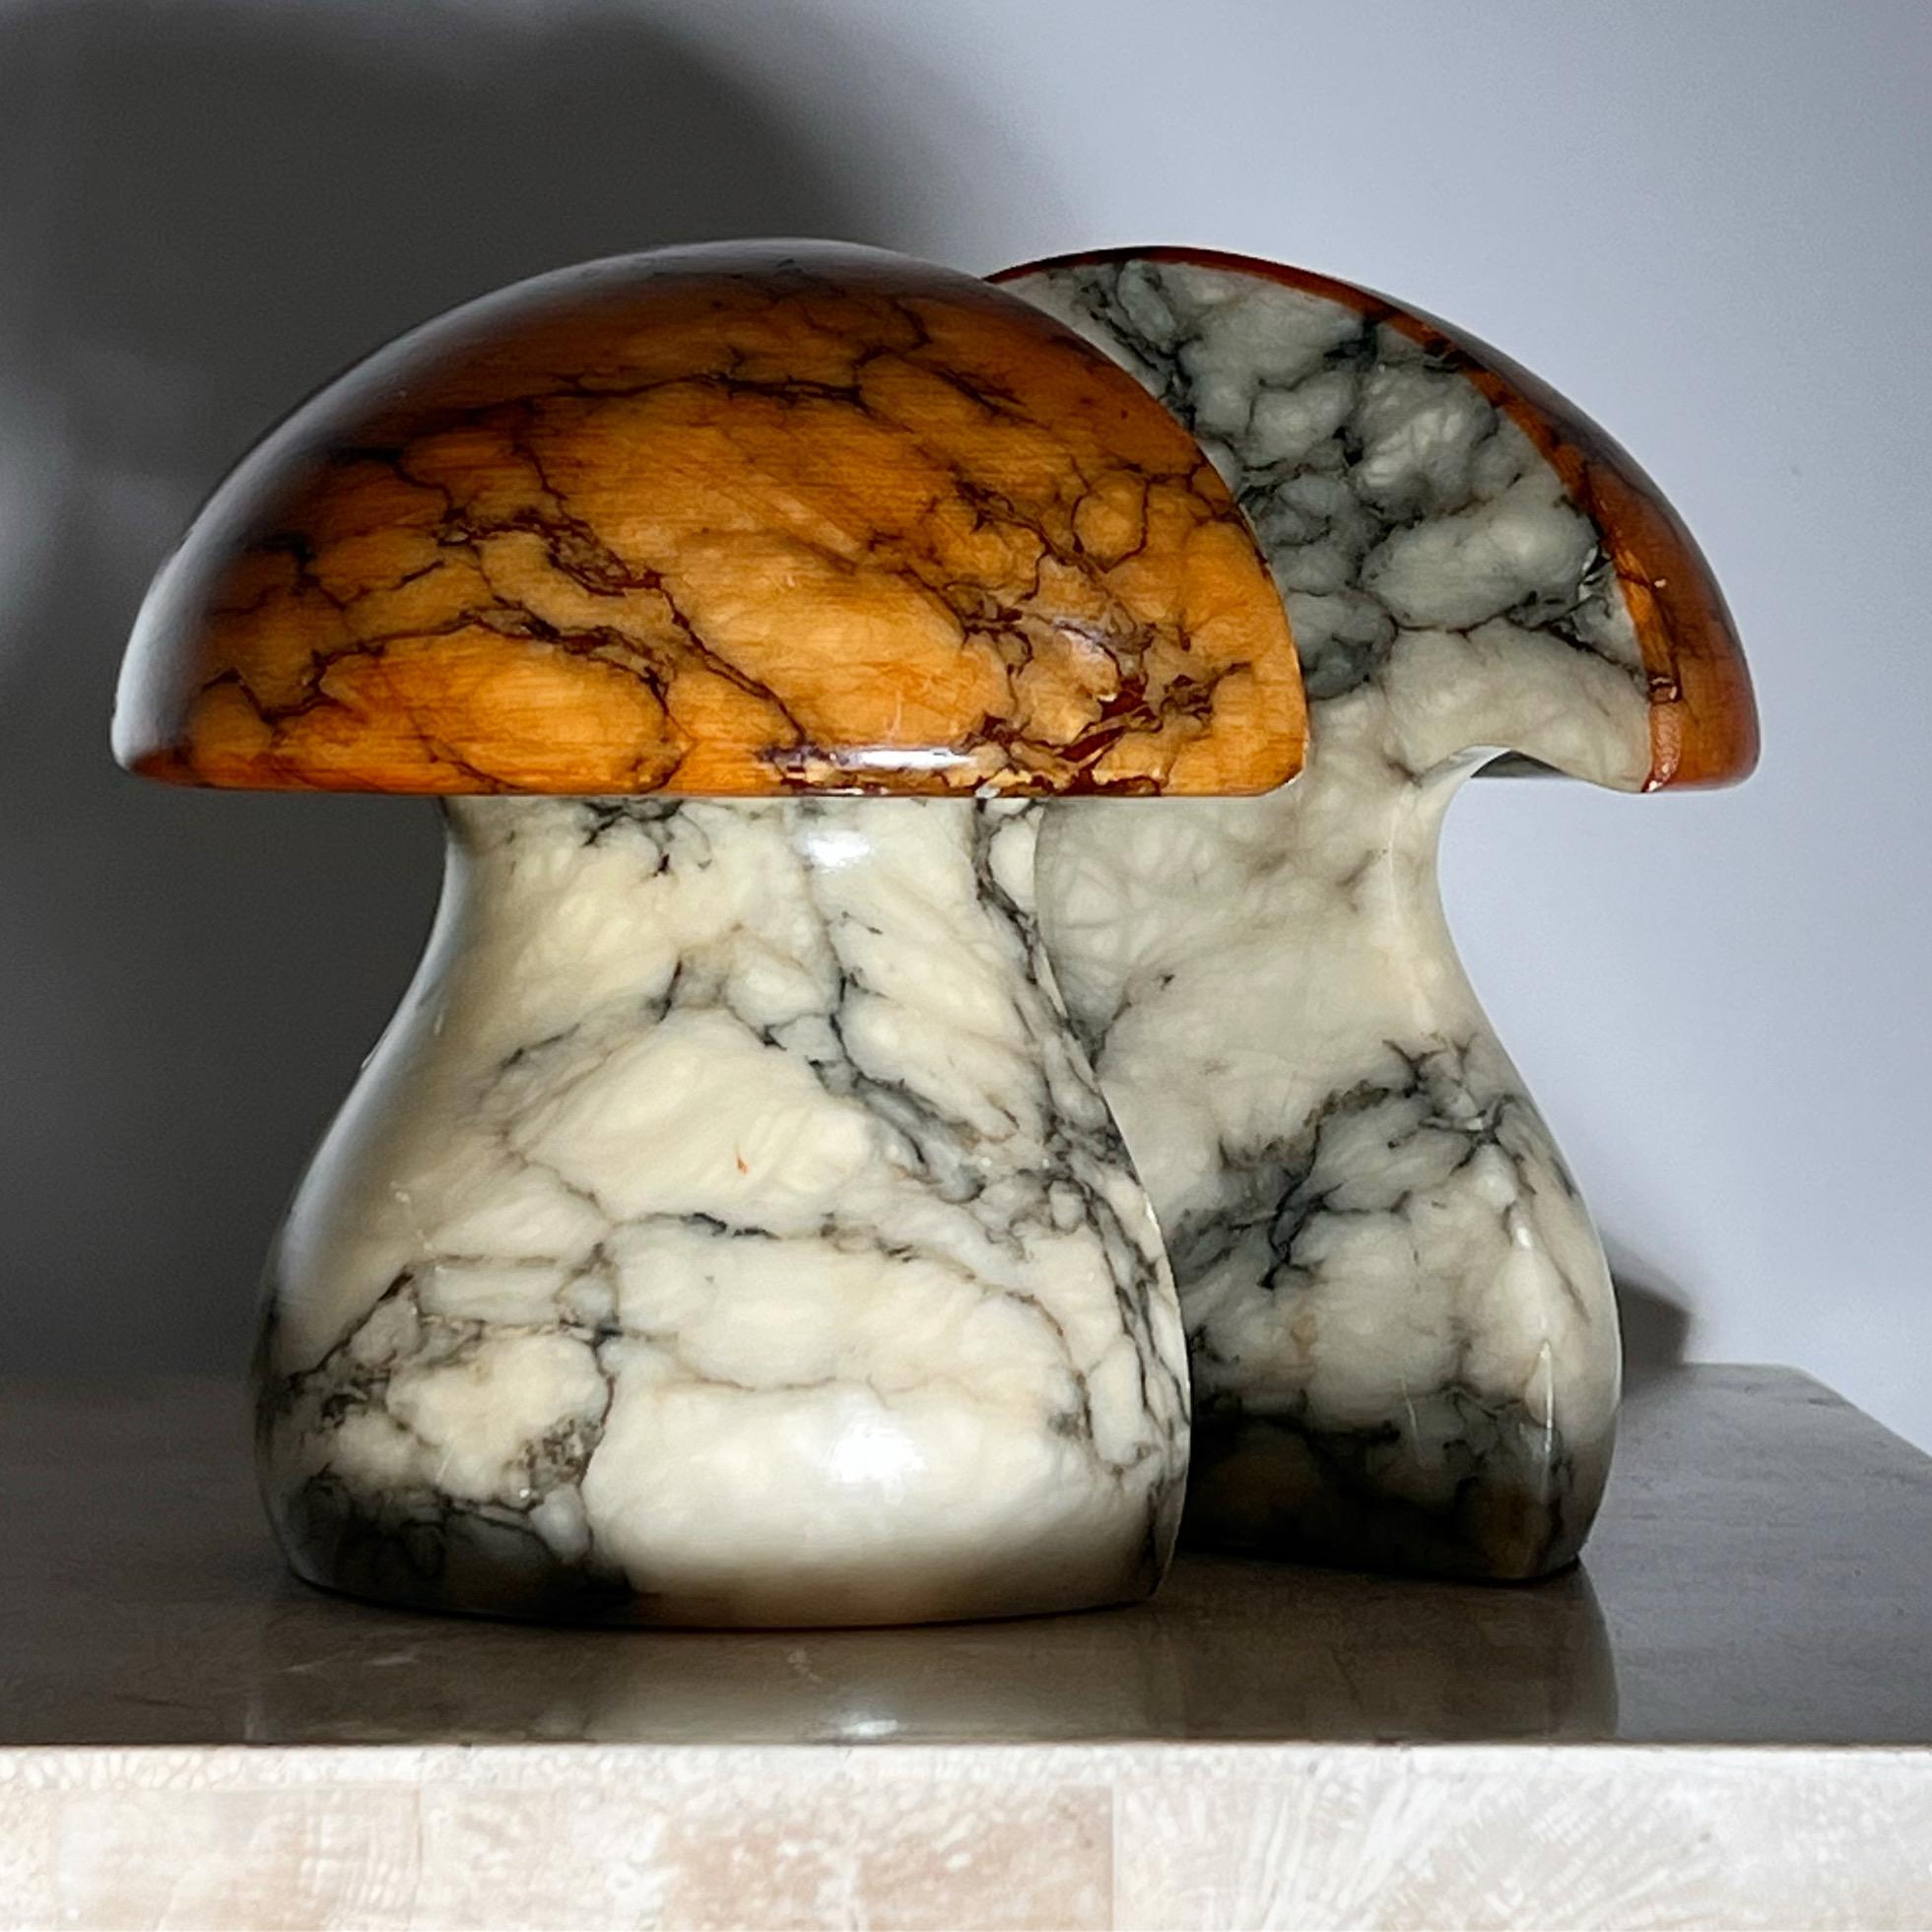 A pair of mushroom marble bookends by Noymer, hand carved in Italy circa early 1960s. Imported by Rico as the label portrays. Tones of coral and eggshell with ash and charcoal veining. Good condition with minor signs of wear.